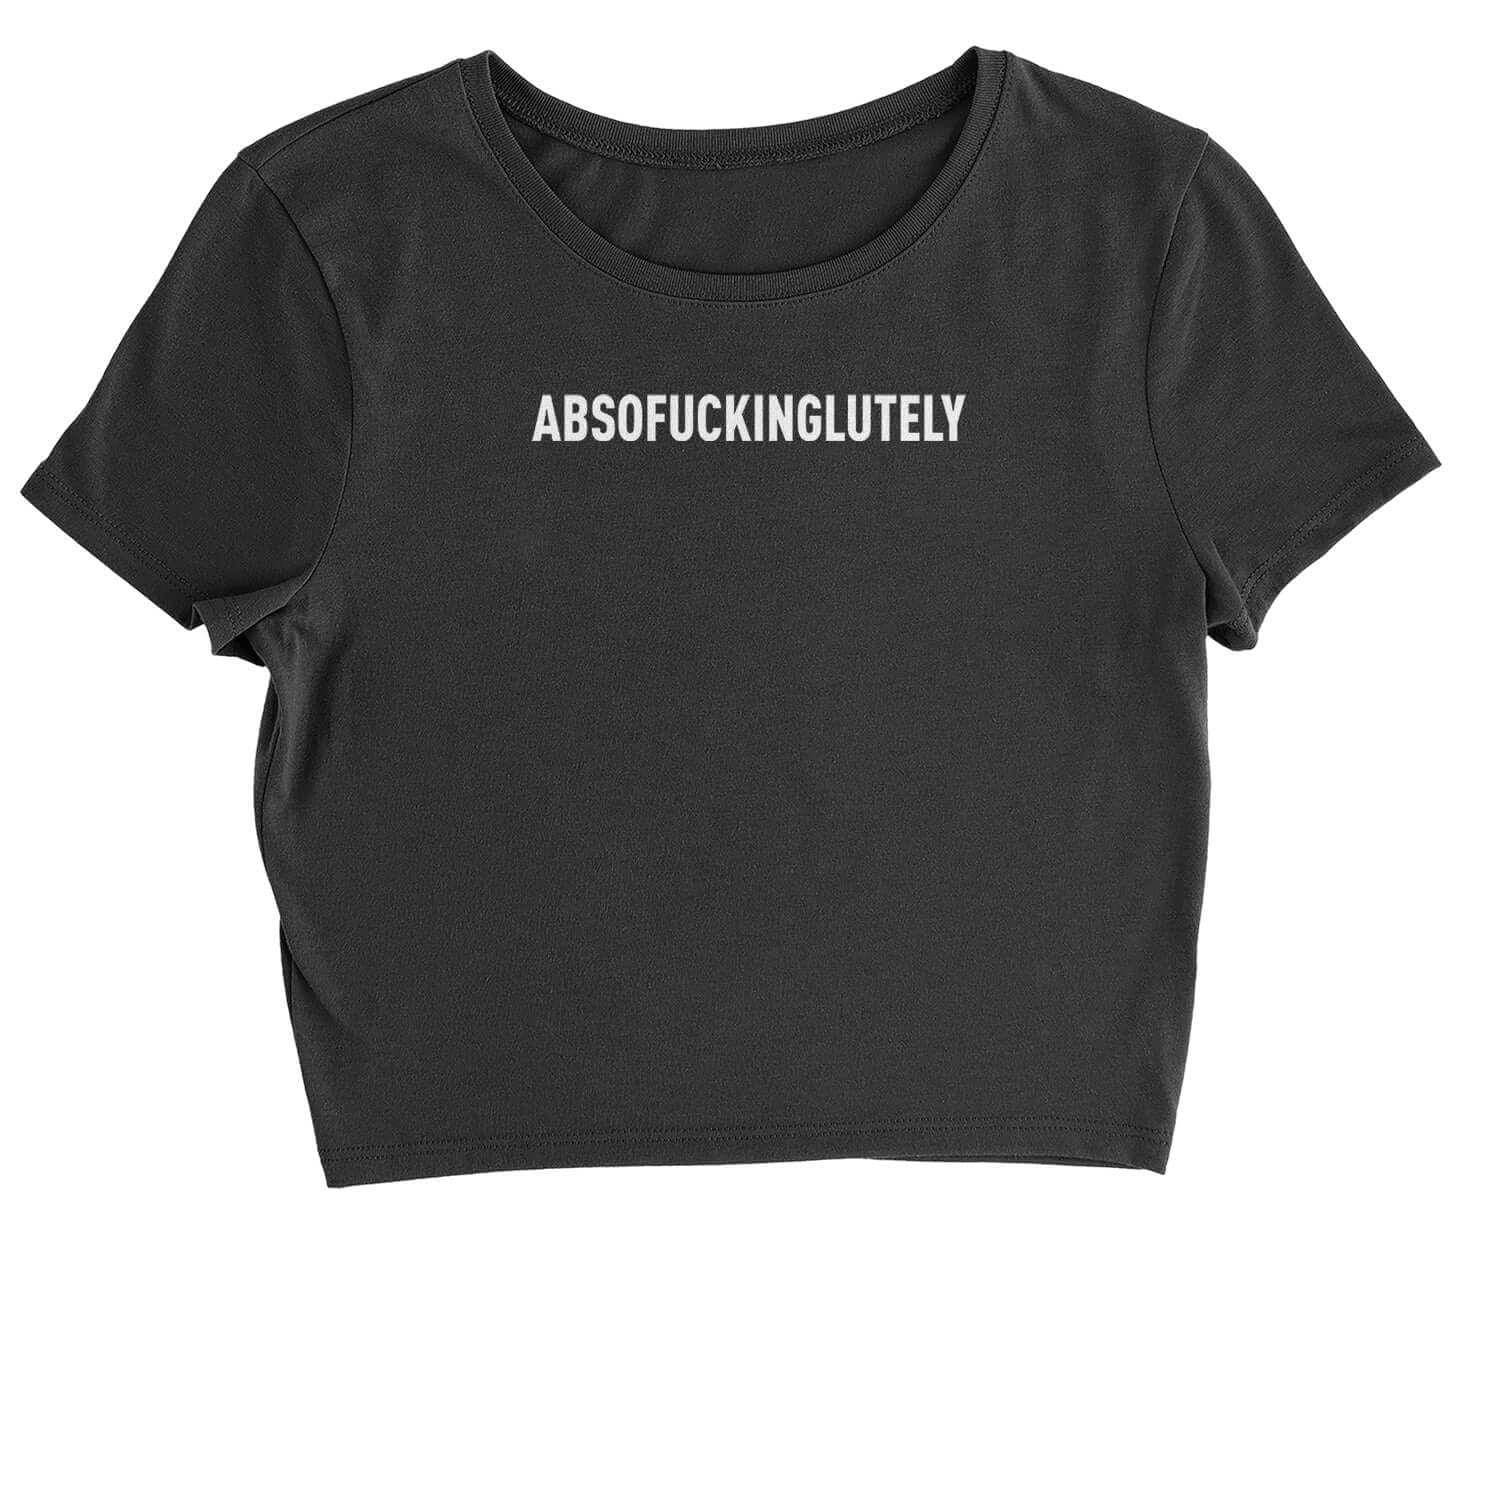 Abso f-cking lutely Cropped T-Shirt funny, shirt by Expression Tees